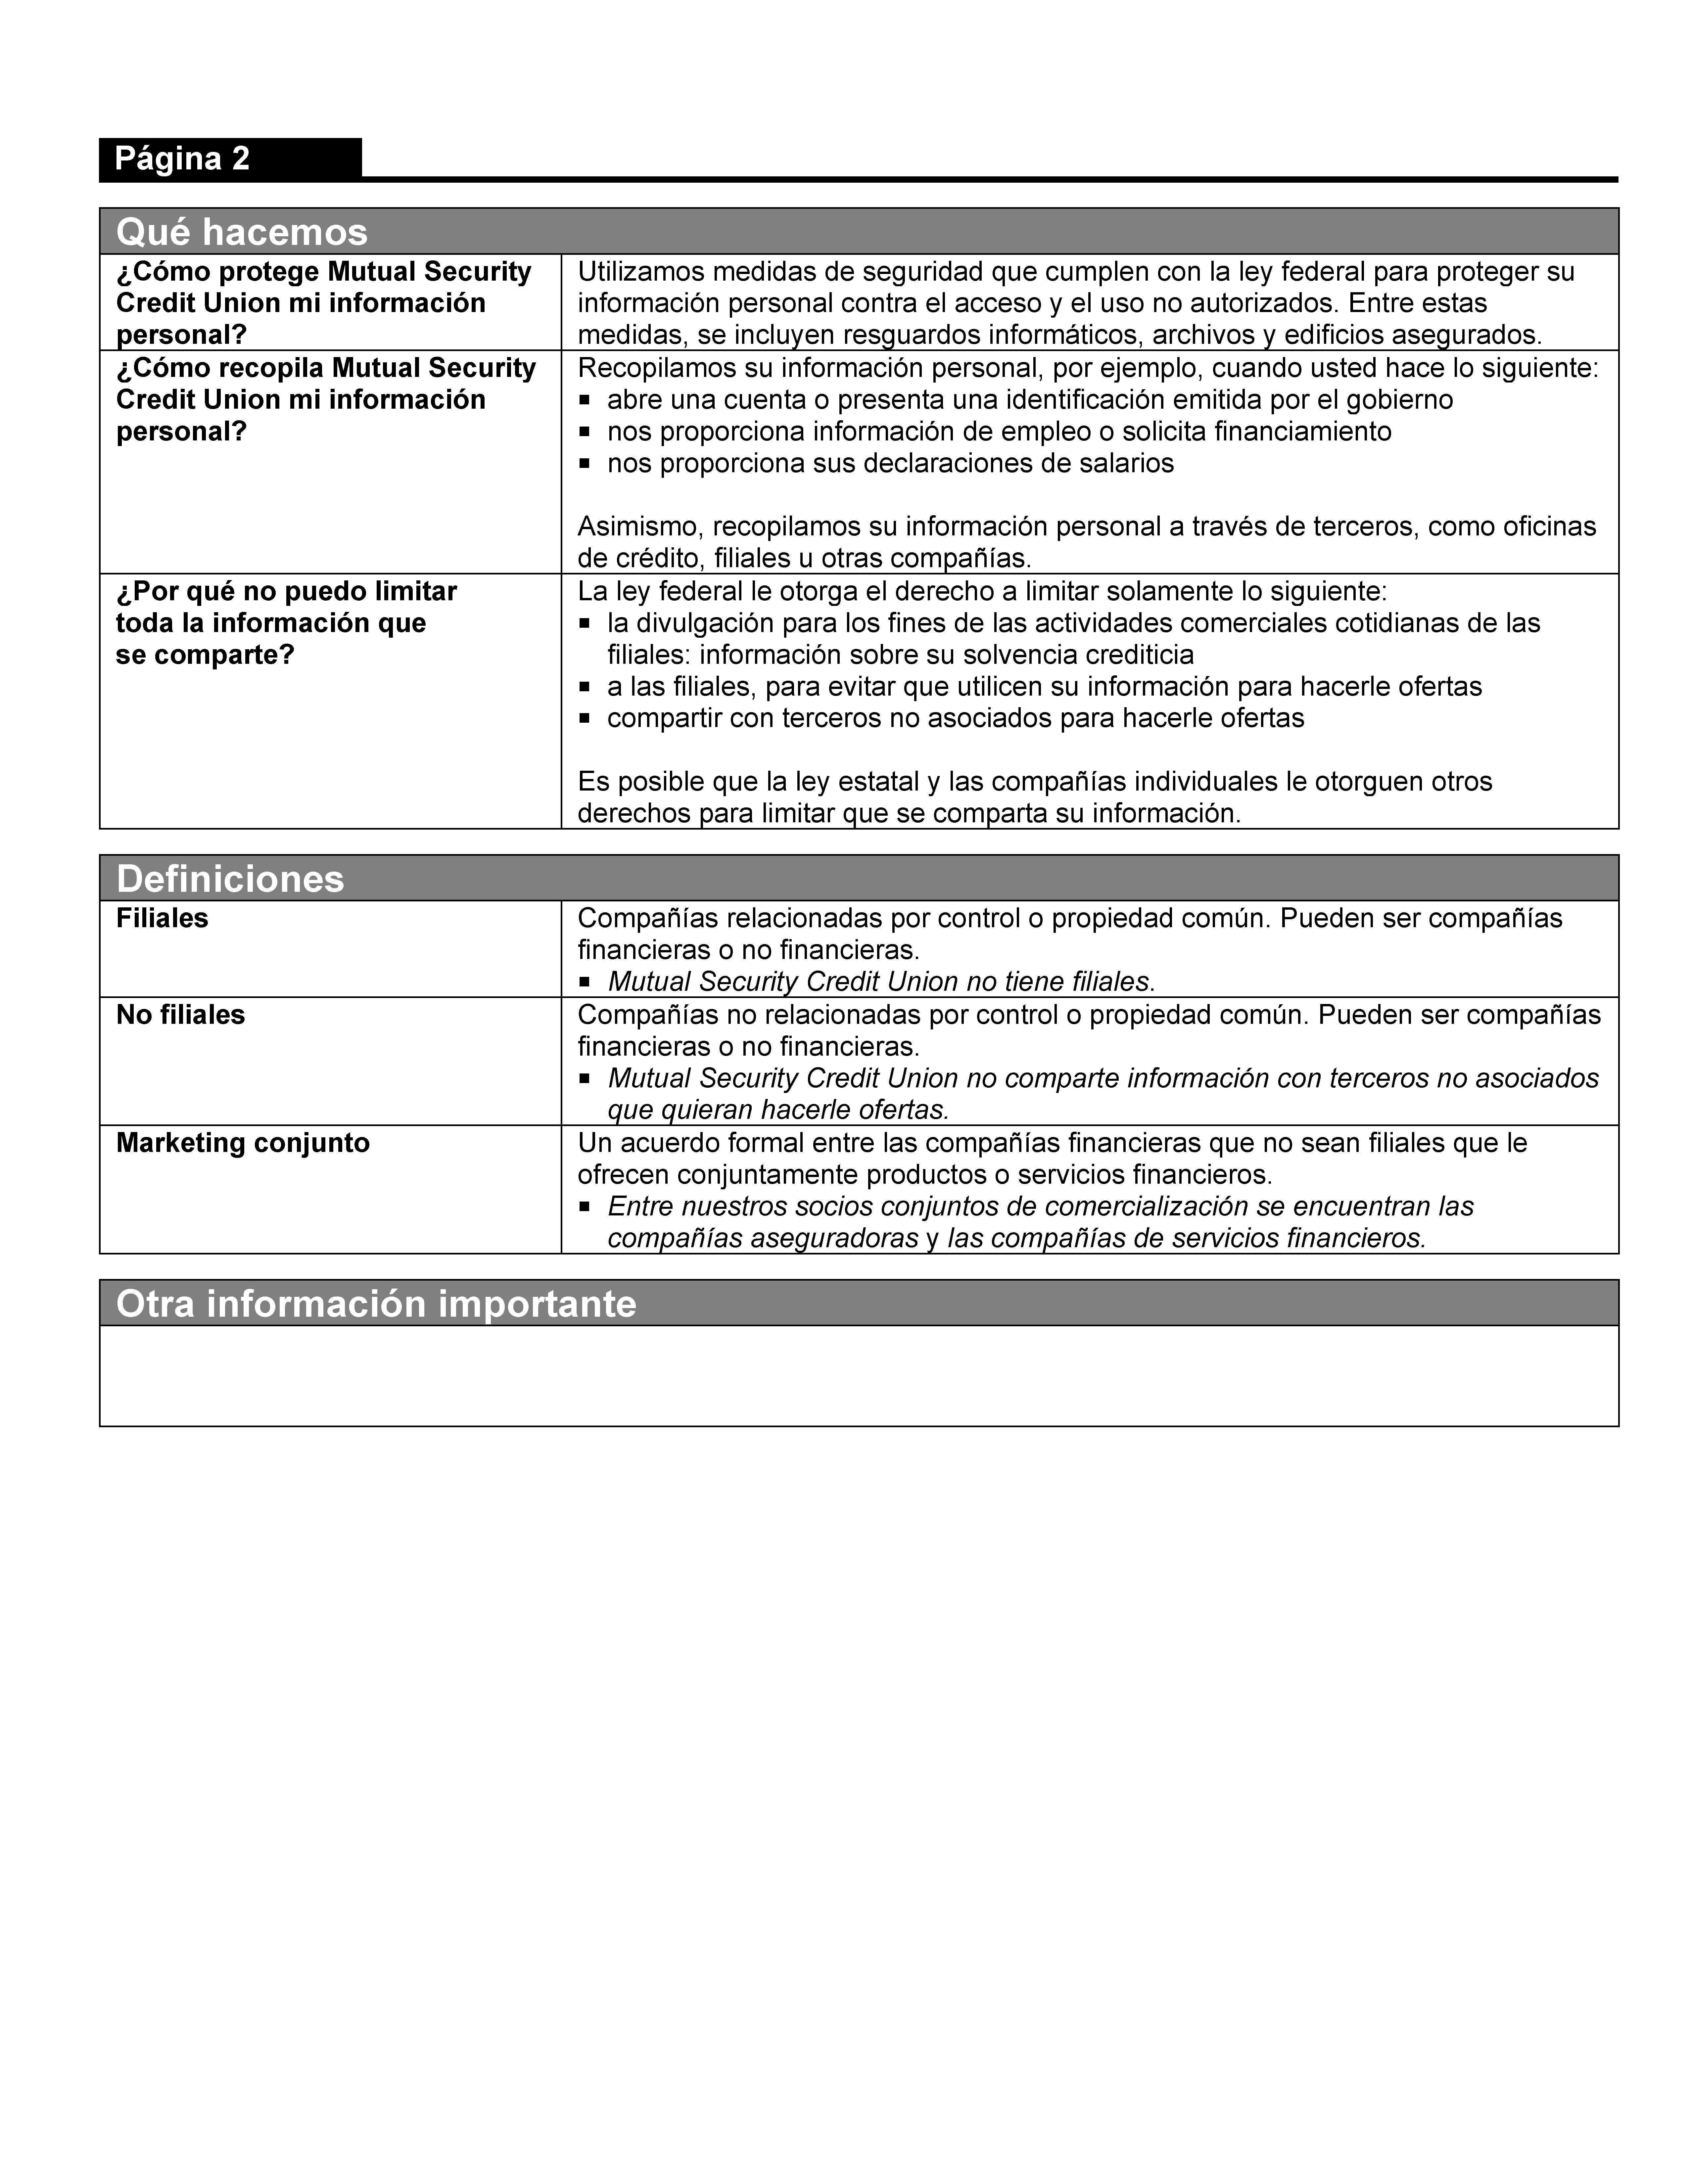 Spanish - Privacy Notice_Page_2